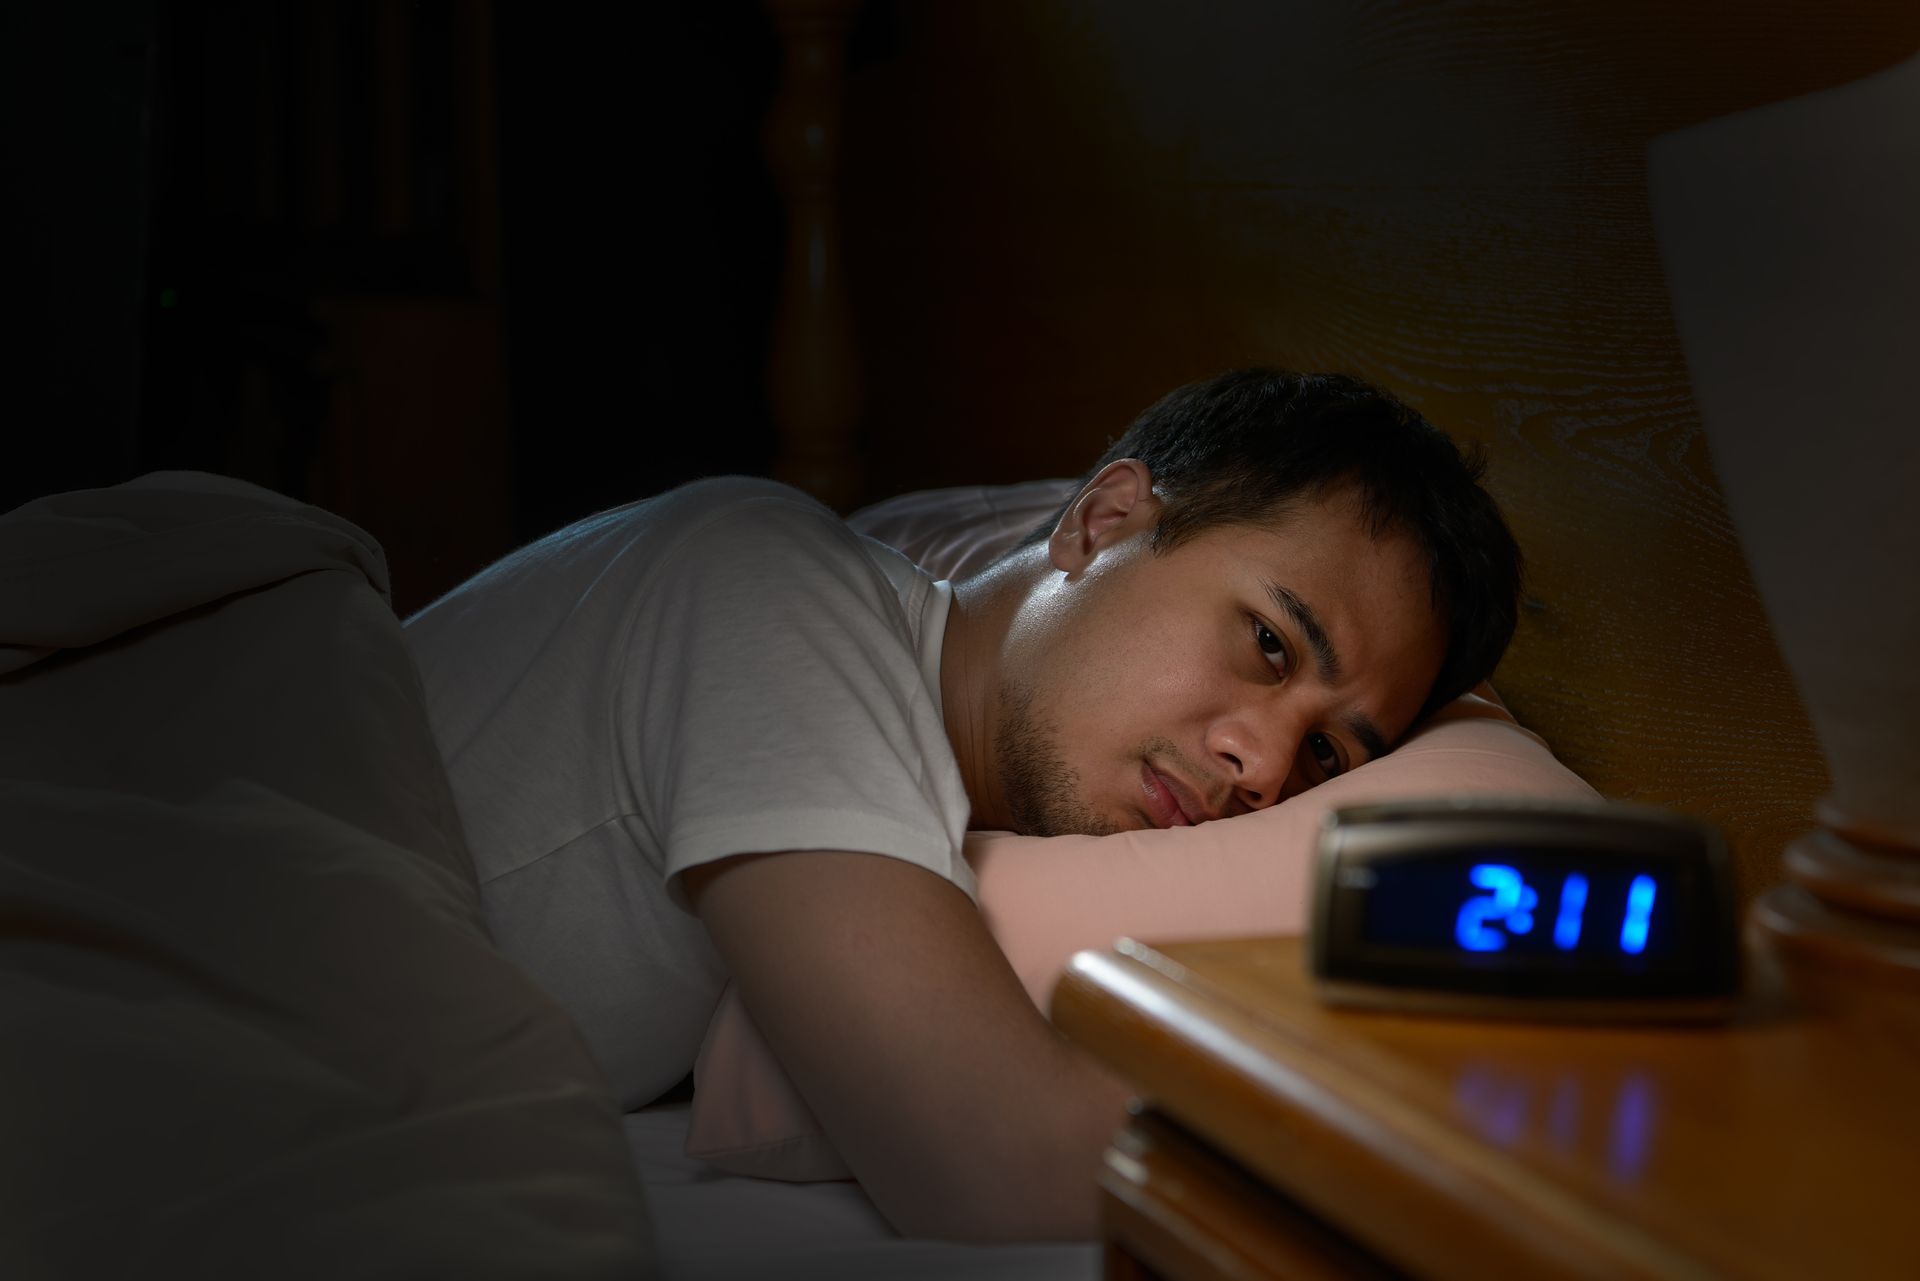 Man with insomnia lying in bed and staring at clock, which reads 